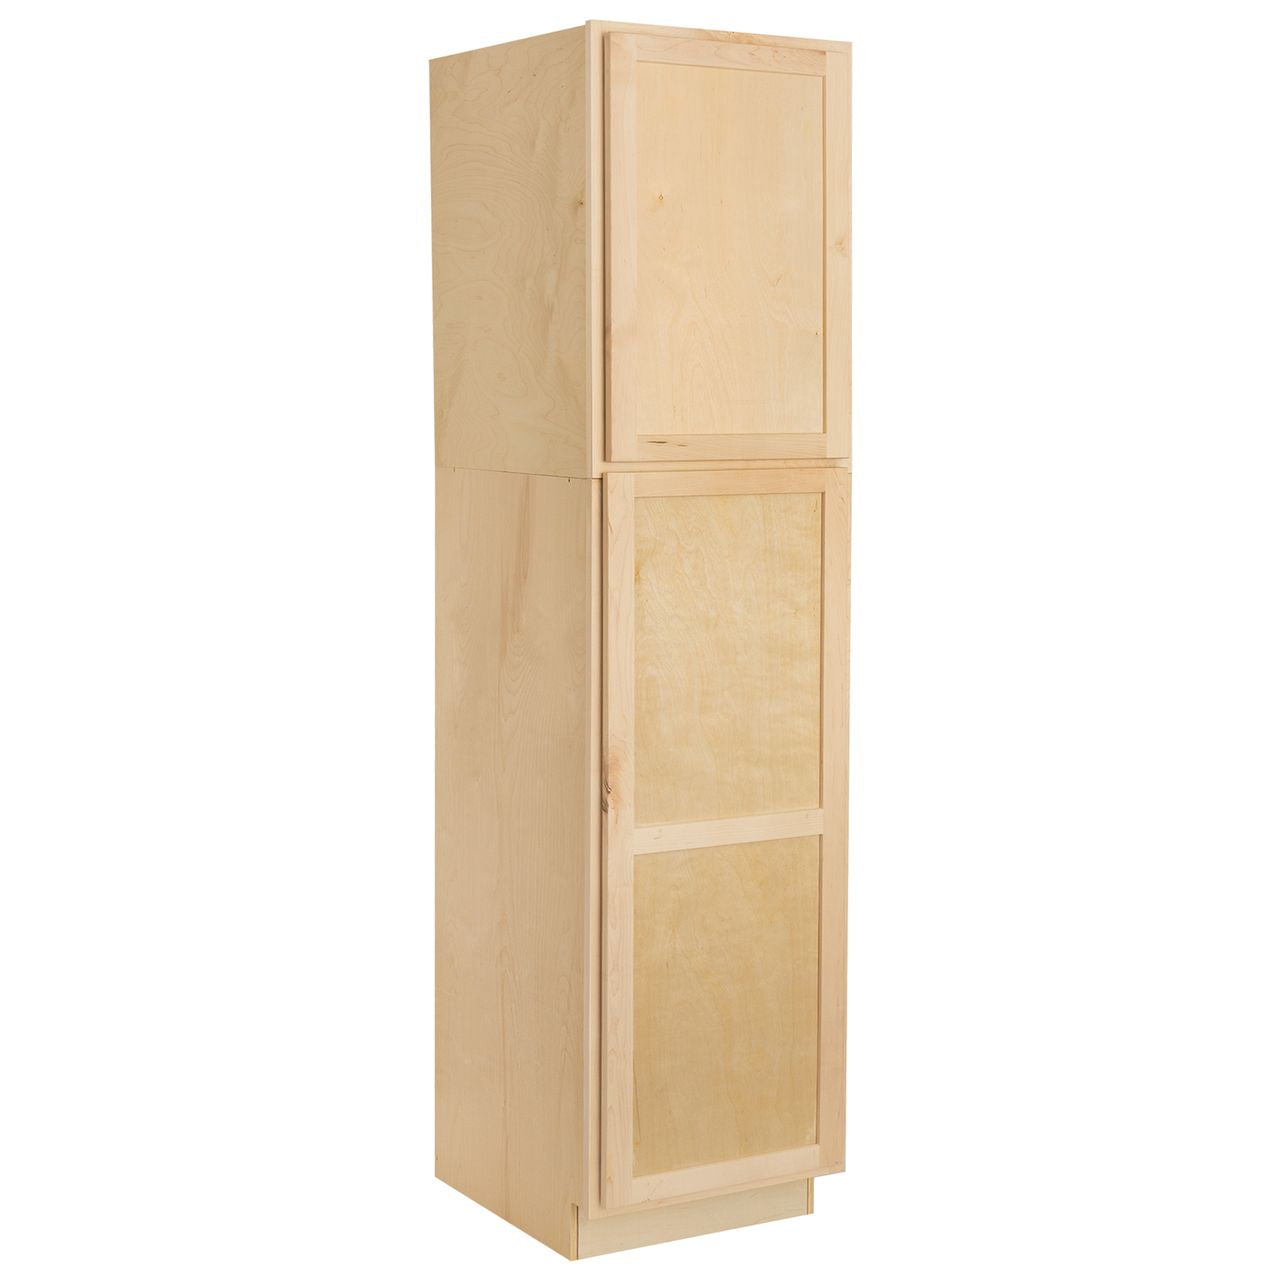 Quicklock RTA (Ready-to-Assemble) Raw Maple Pantry Cabinet- 24"W x (84", 90", 96"H)